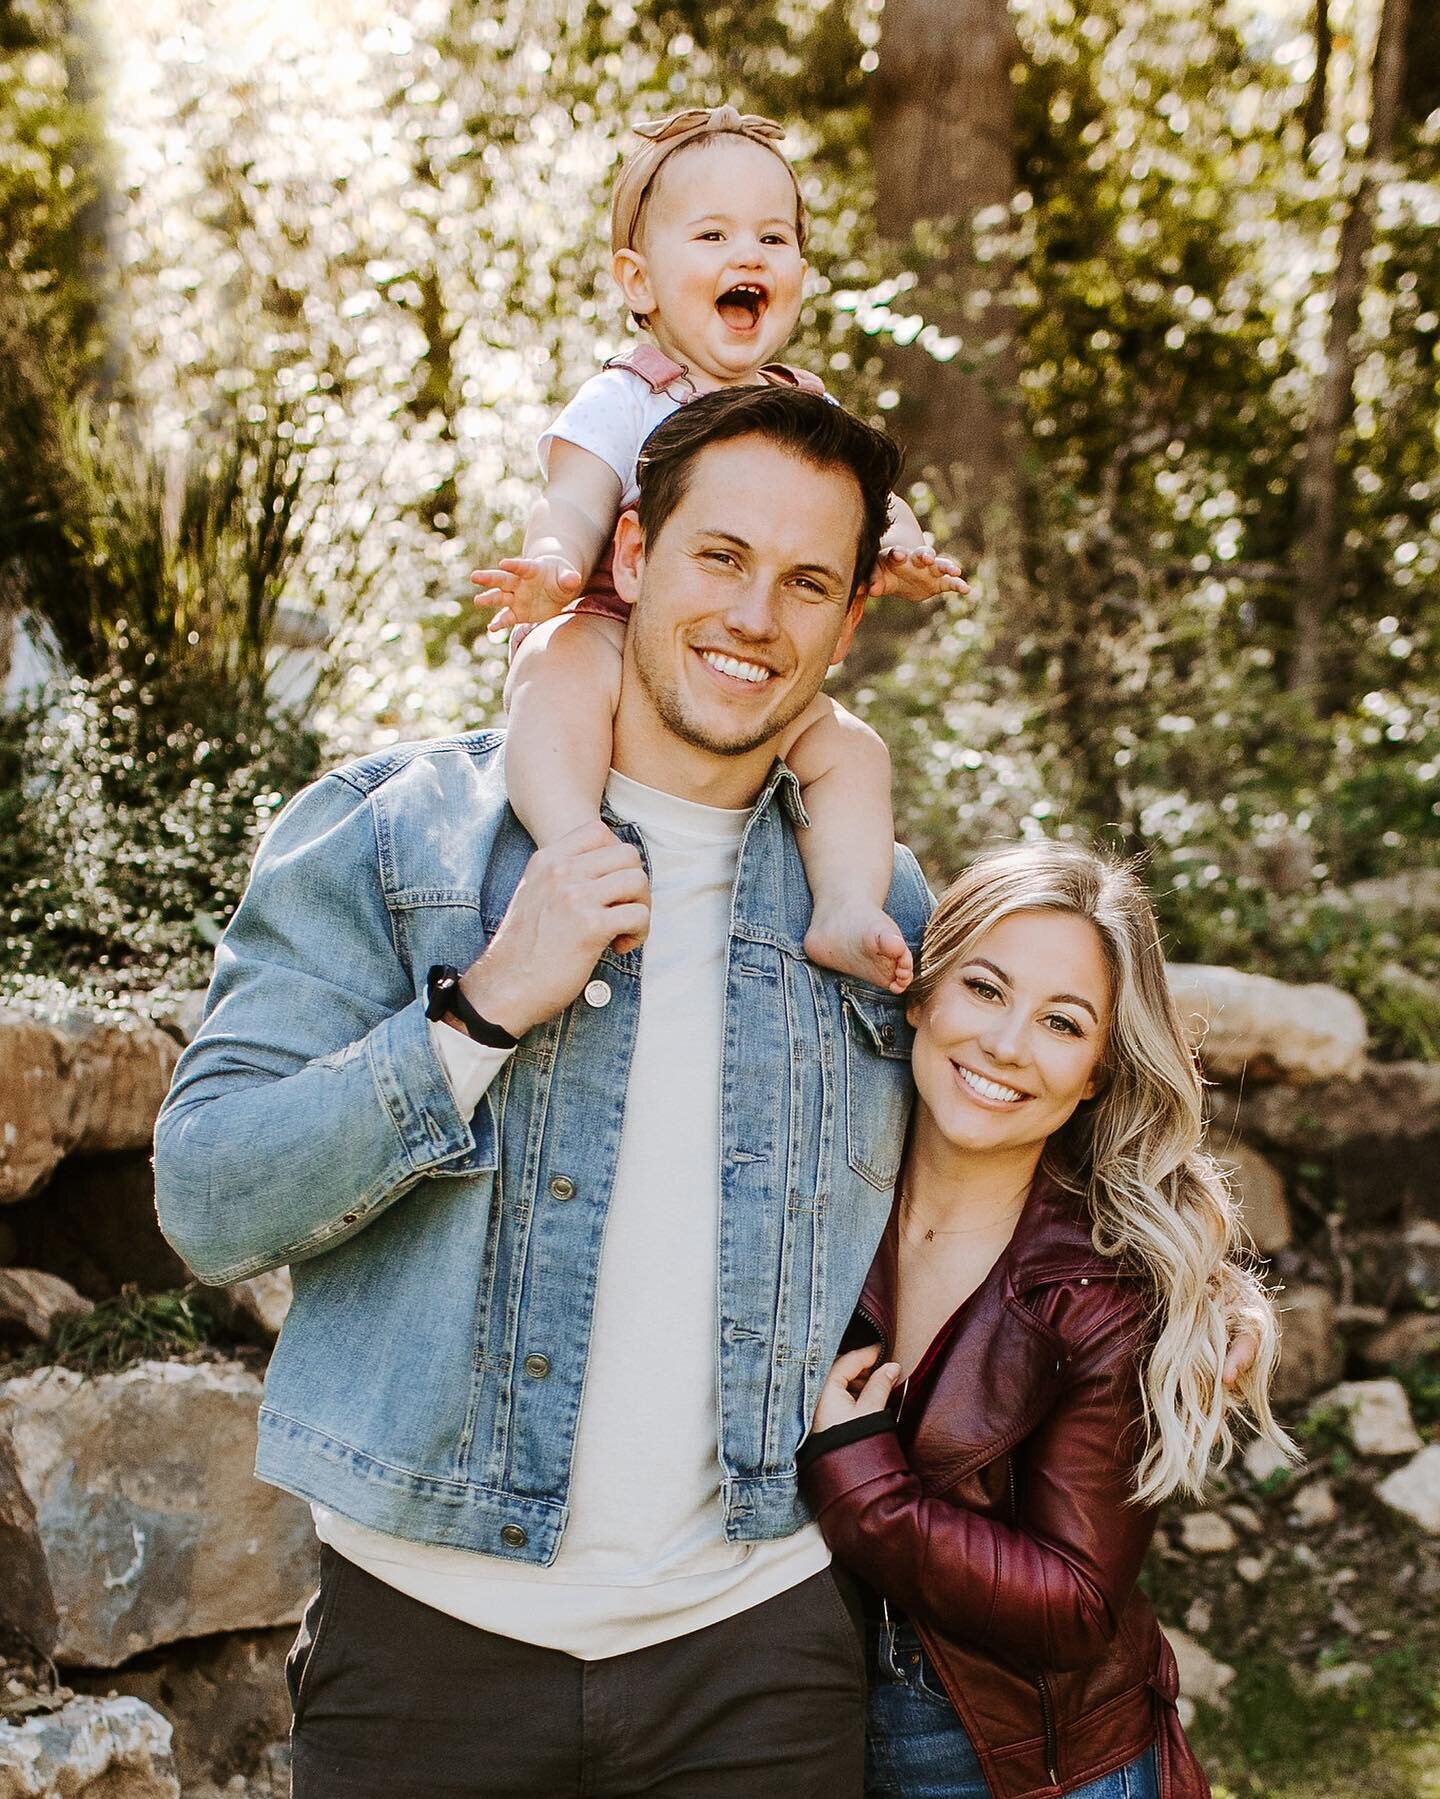 Some of my favorite cuties ❤️ @shawnjohnson @andrewdeast @drewhazeleast